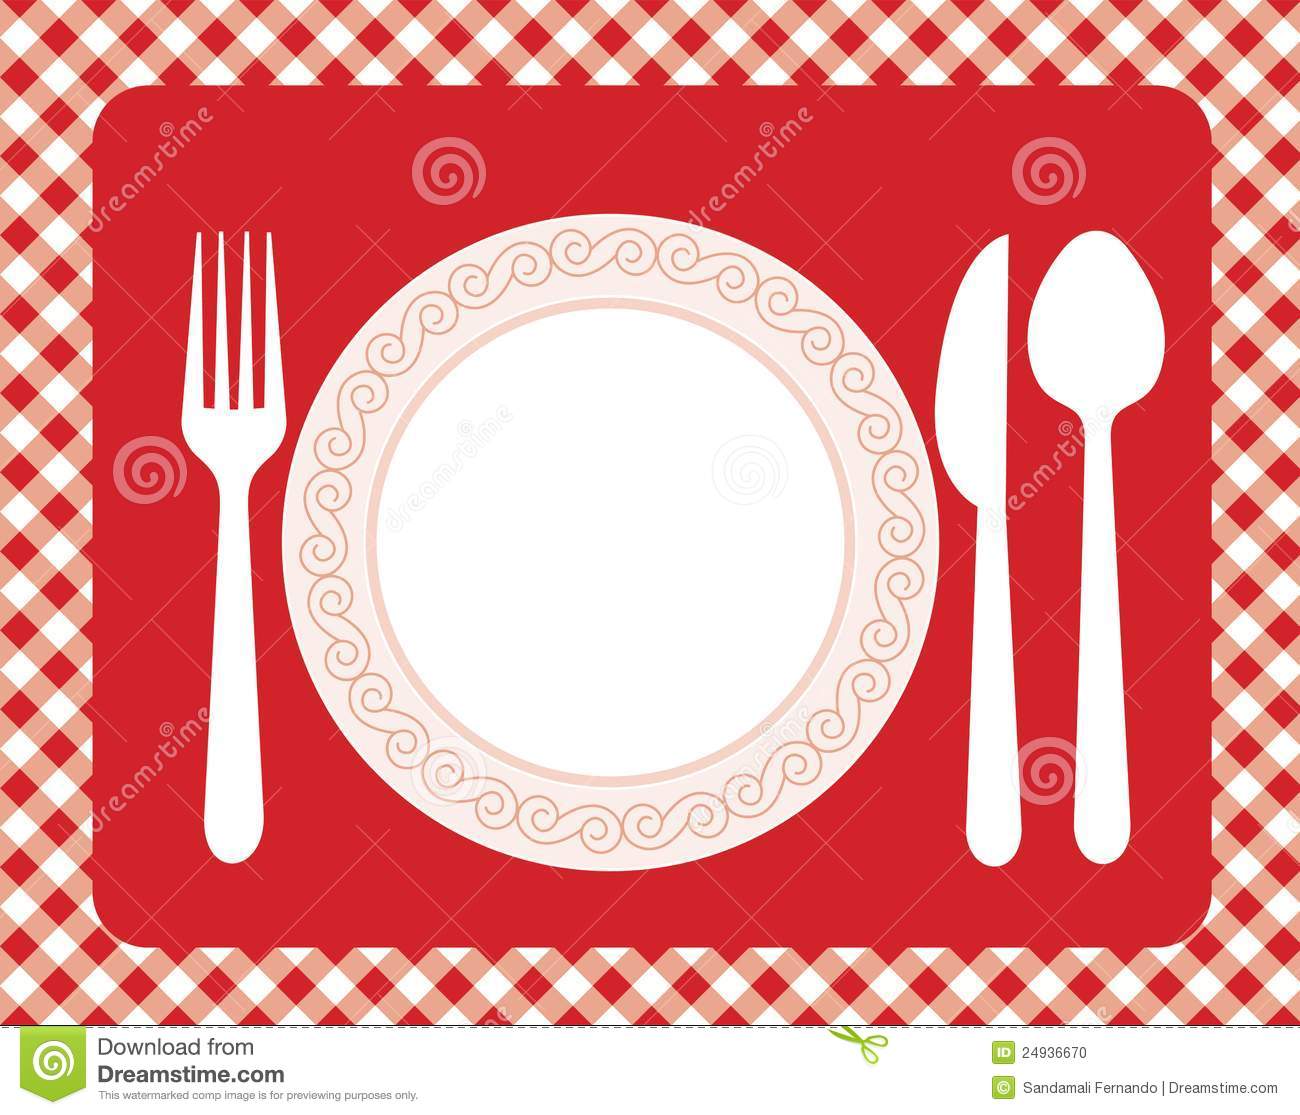 Dinner Invitation Card Background With Spoon Knife And Fork 